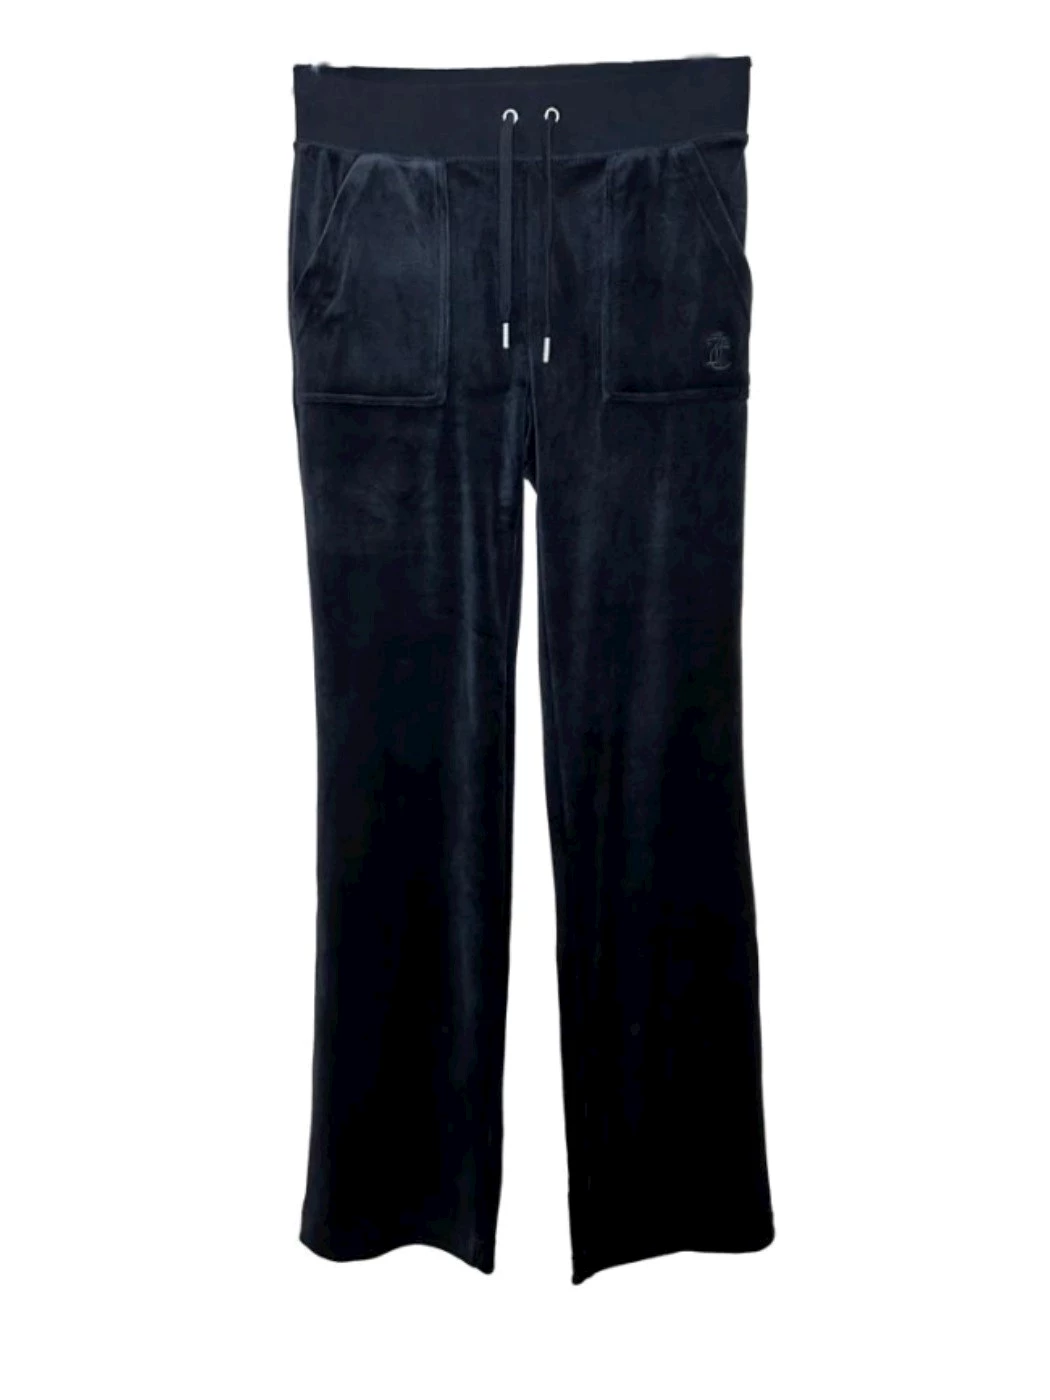 Juicy Couture velvet trousers